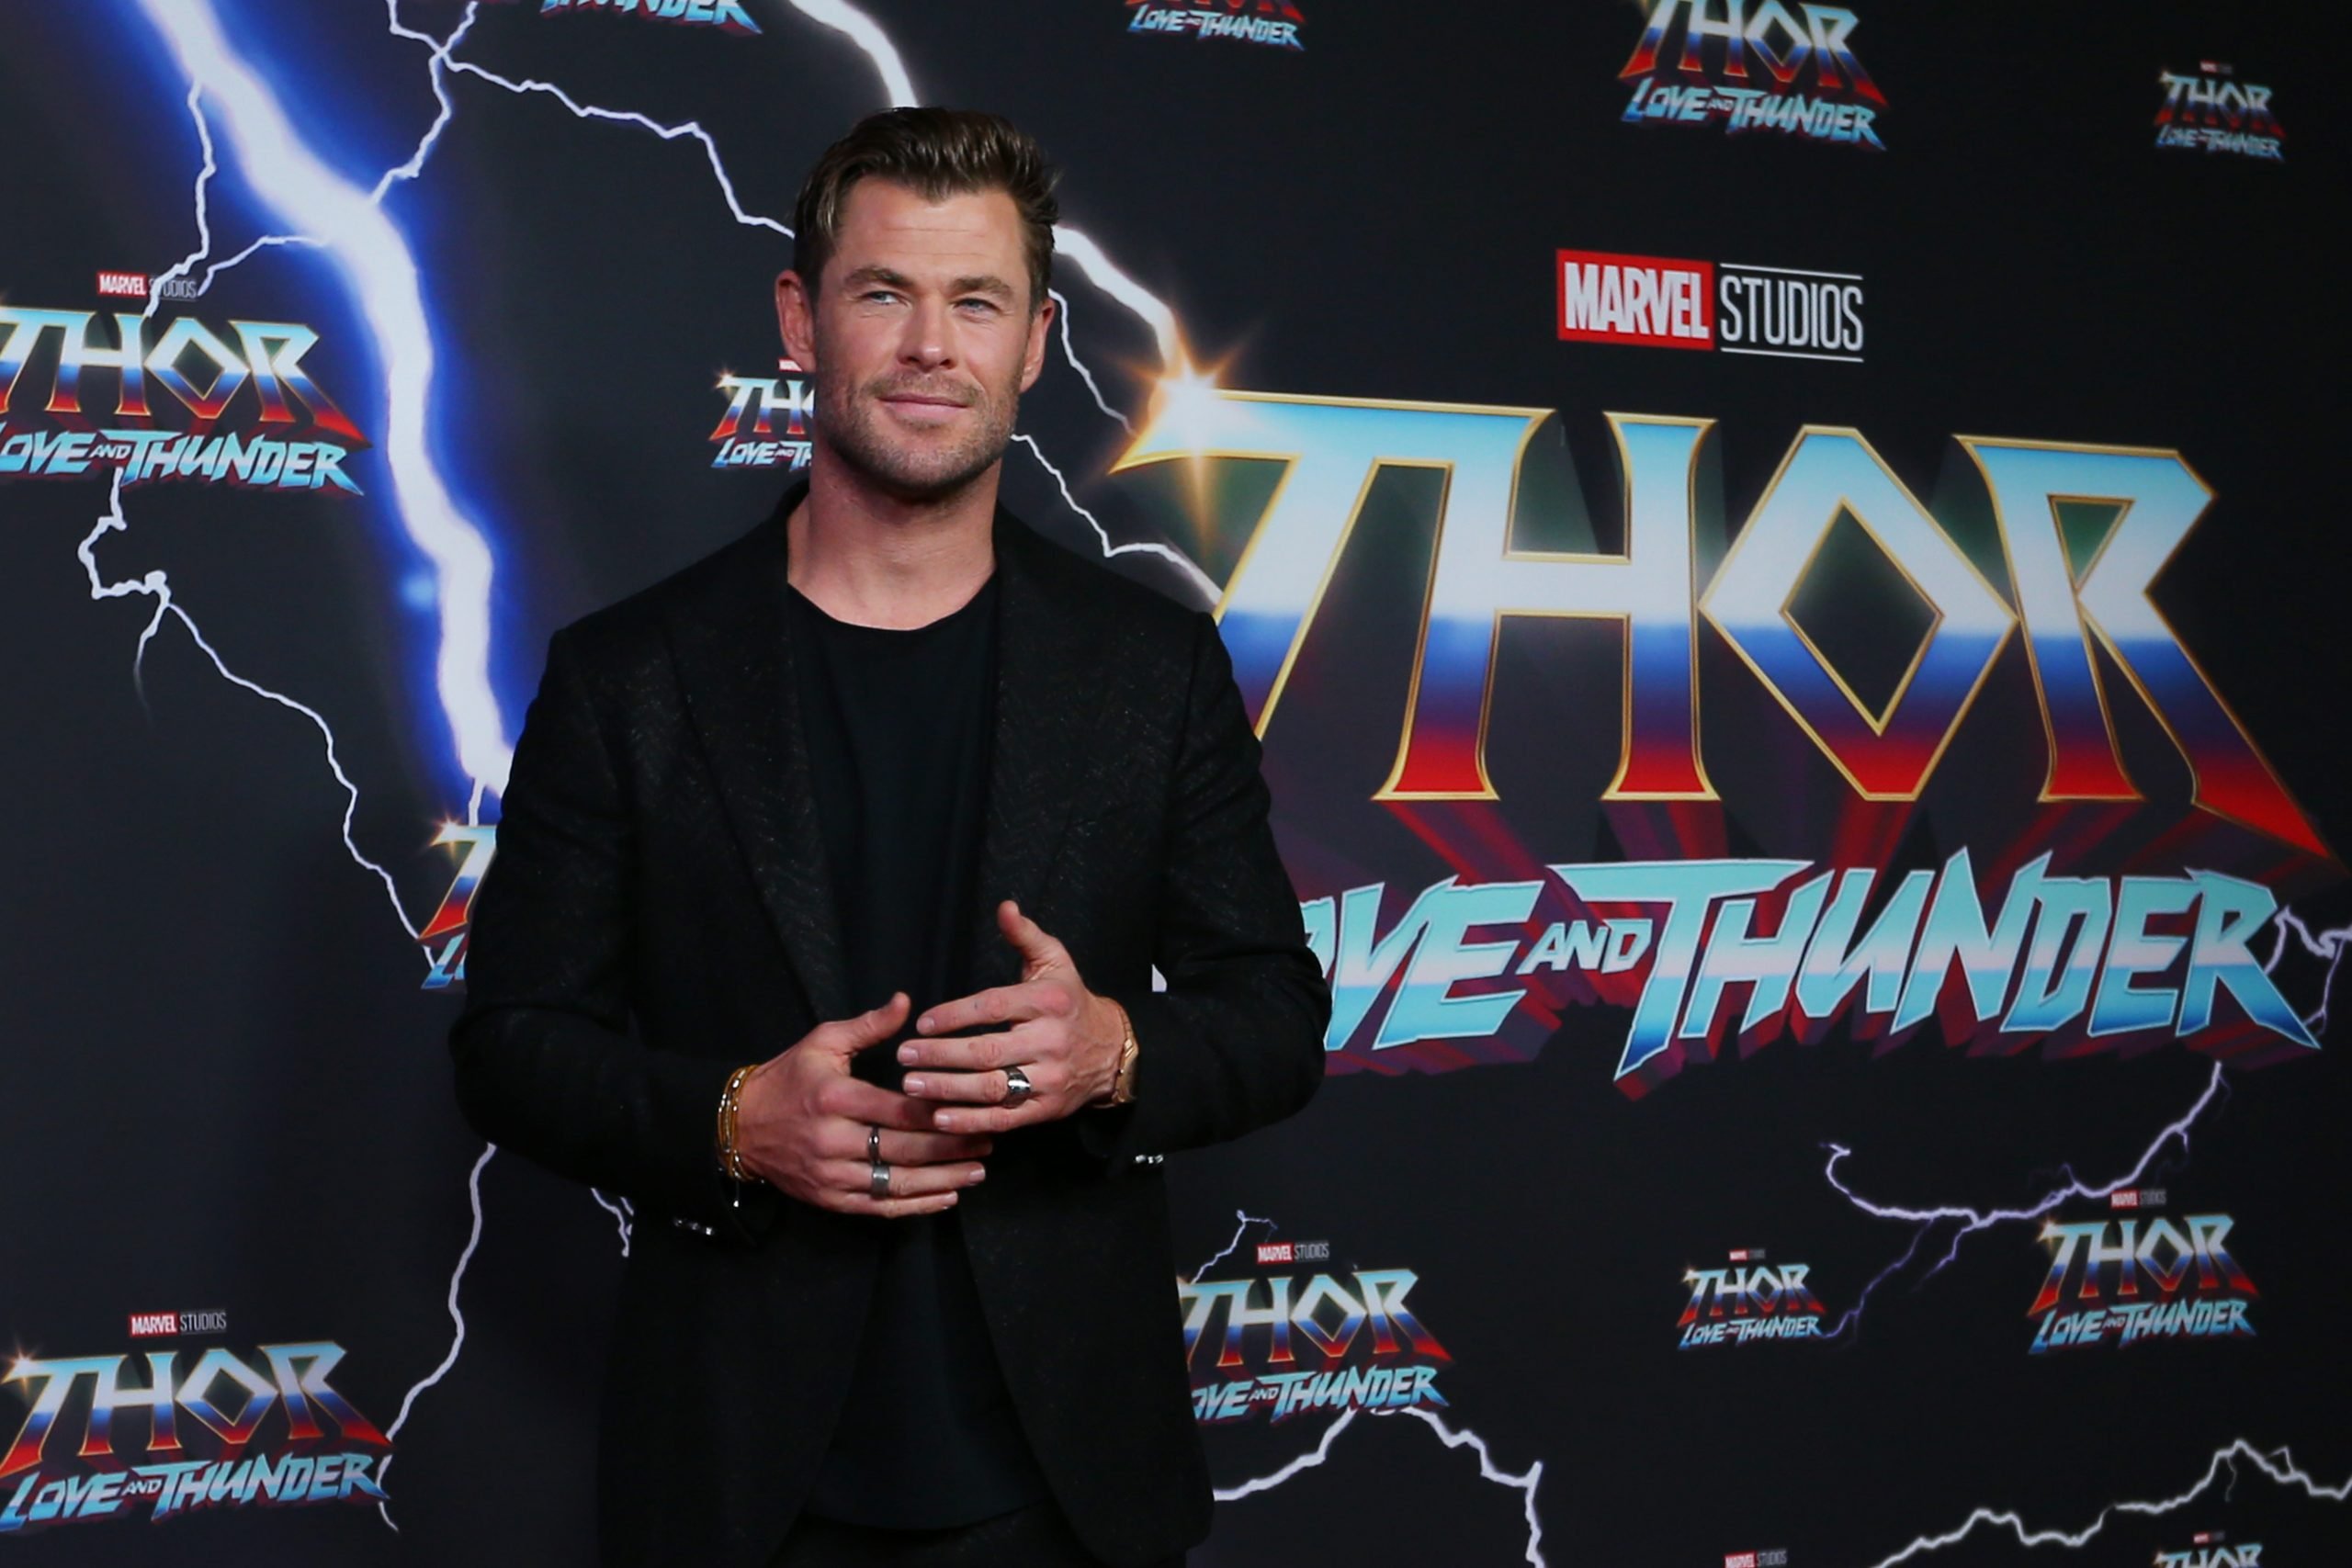 Thor: Love and Thunder Becomes Least-Rated Thor Film on Rotten